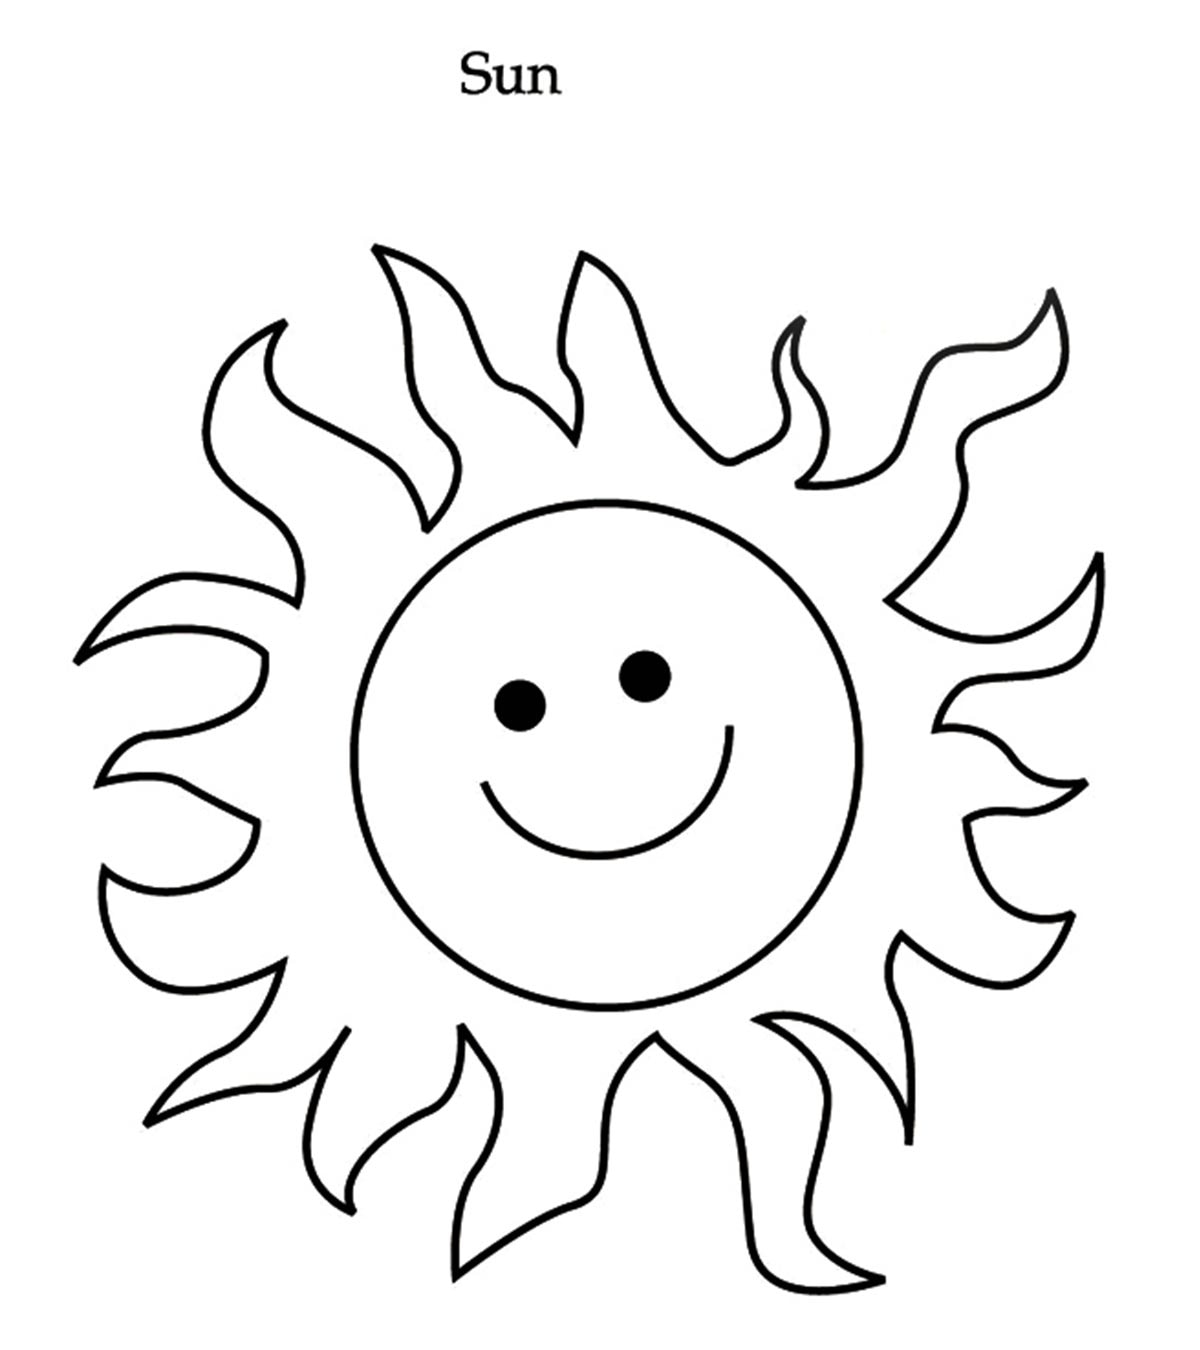 20 Solar System Coloring Pages For Your Little Ones_image